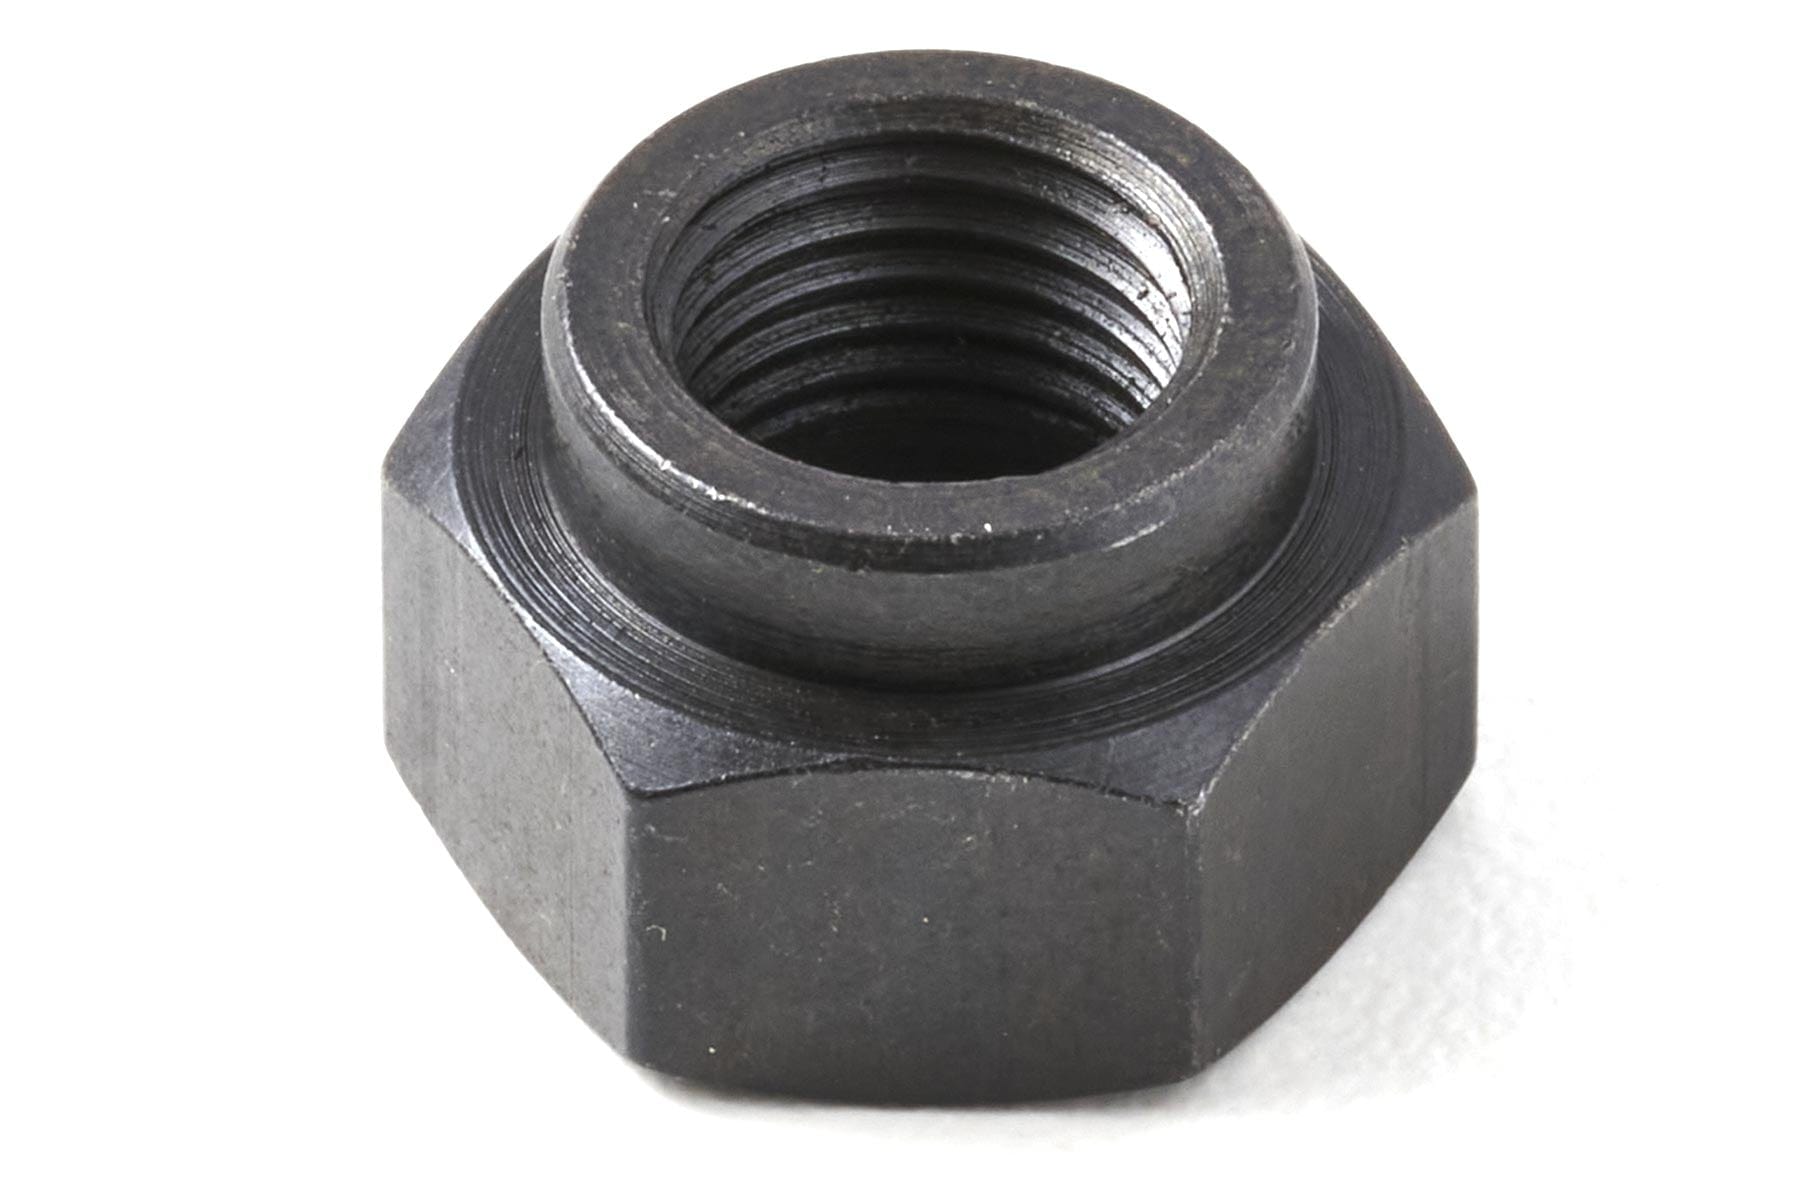 NGH GF38 Replacement Inch Hex Nut NGH-6236